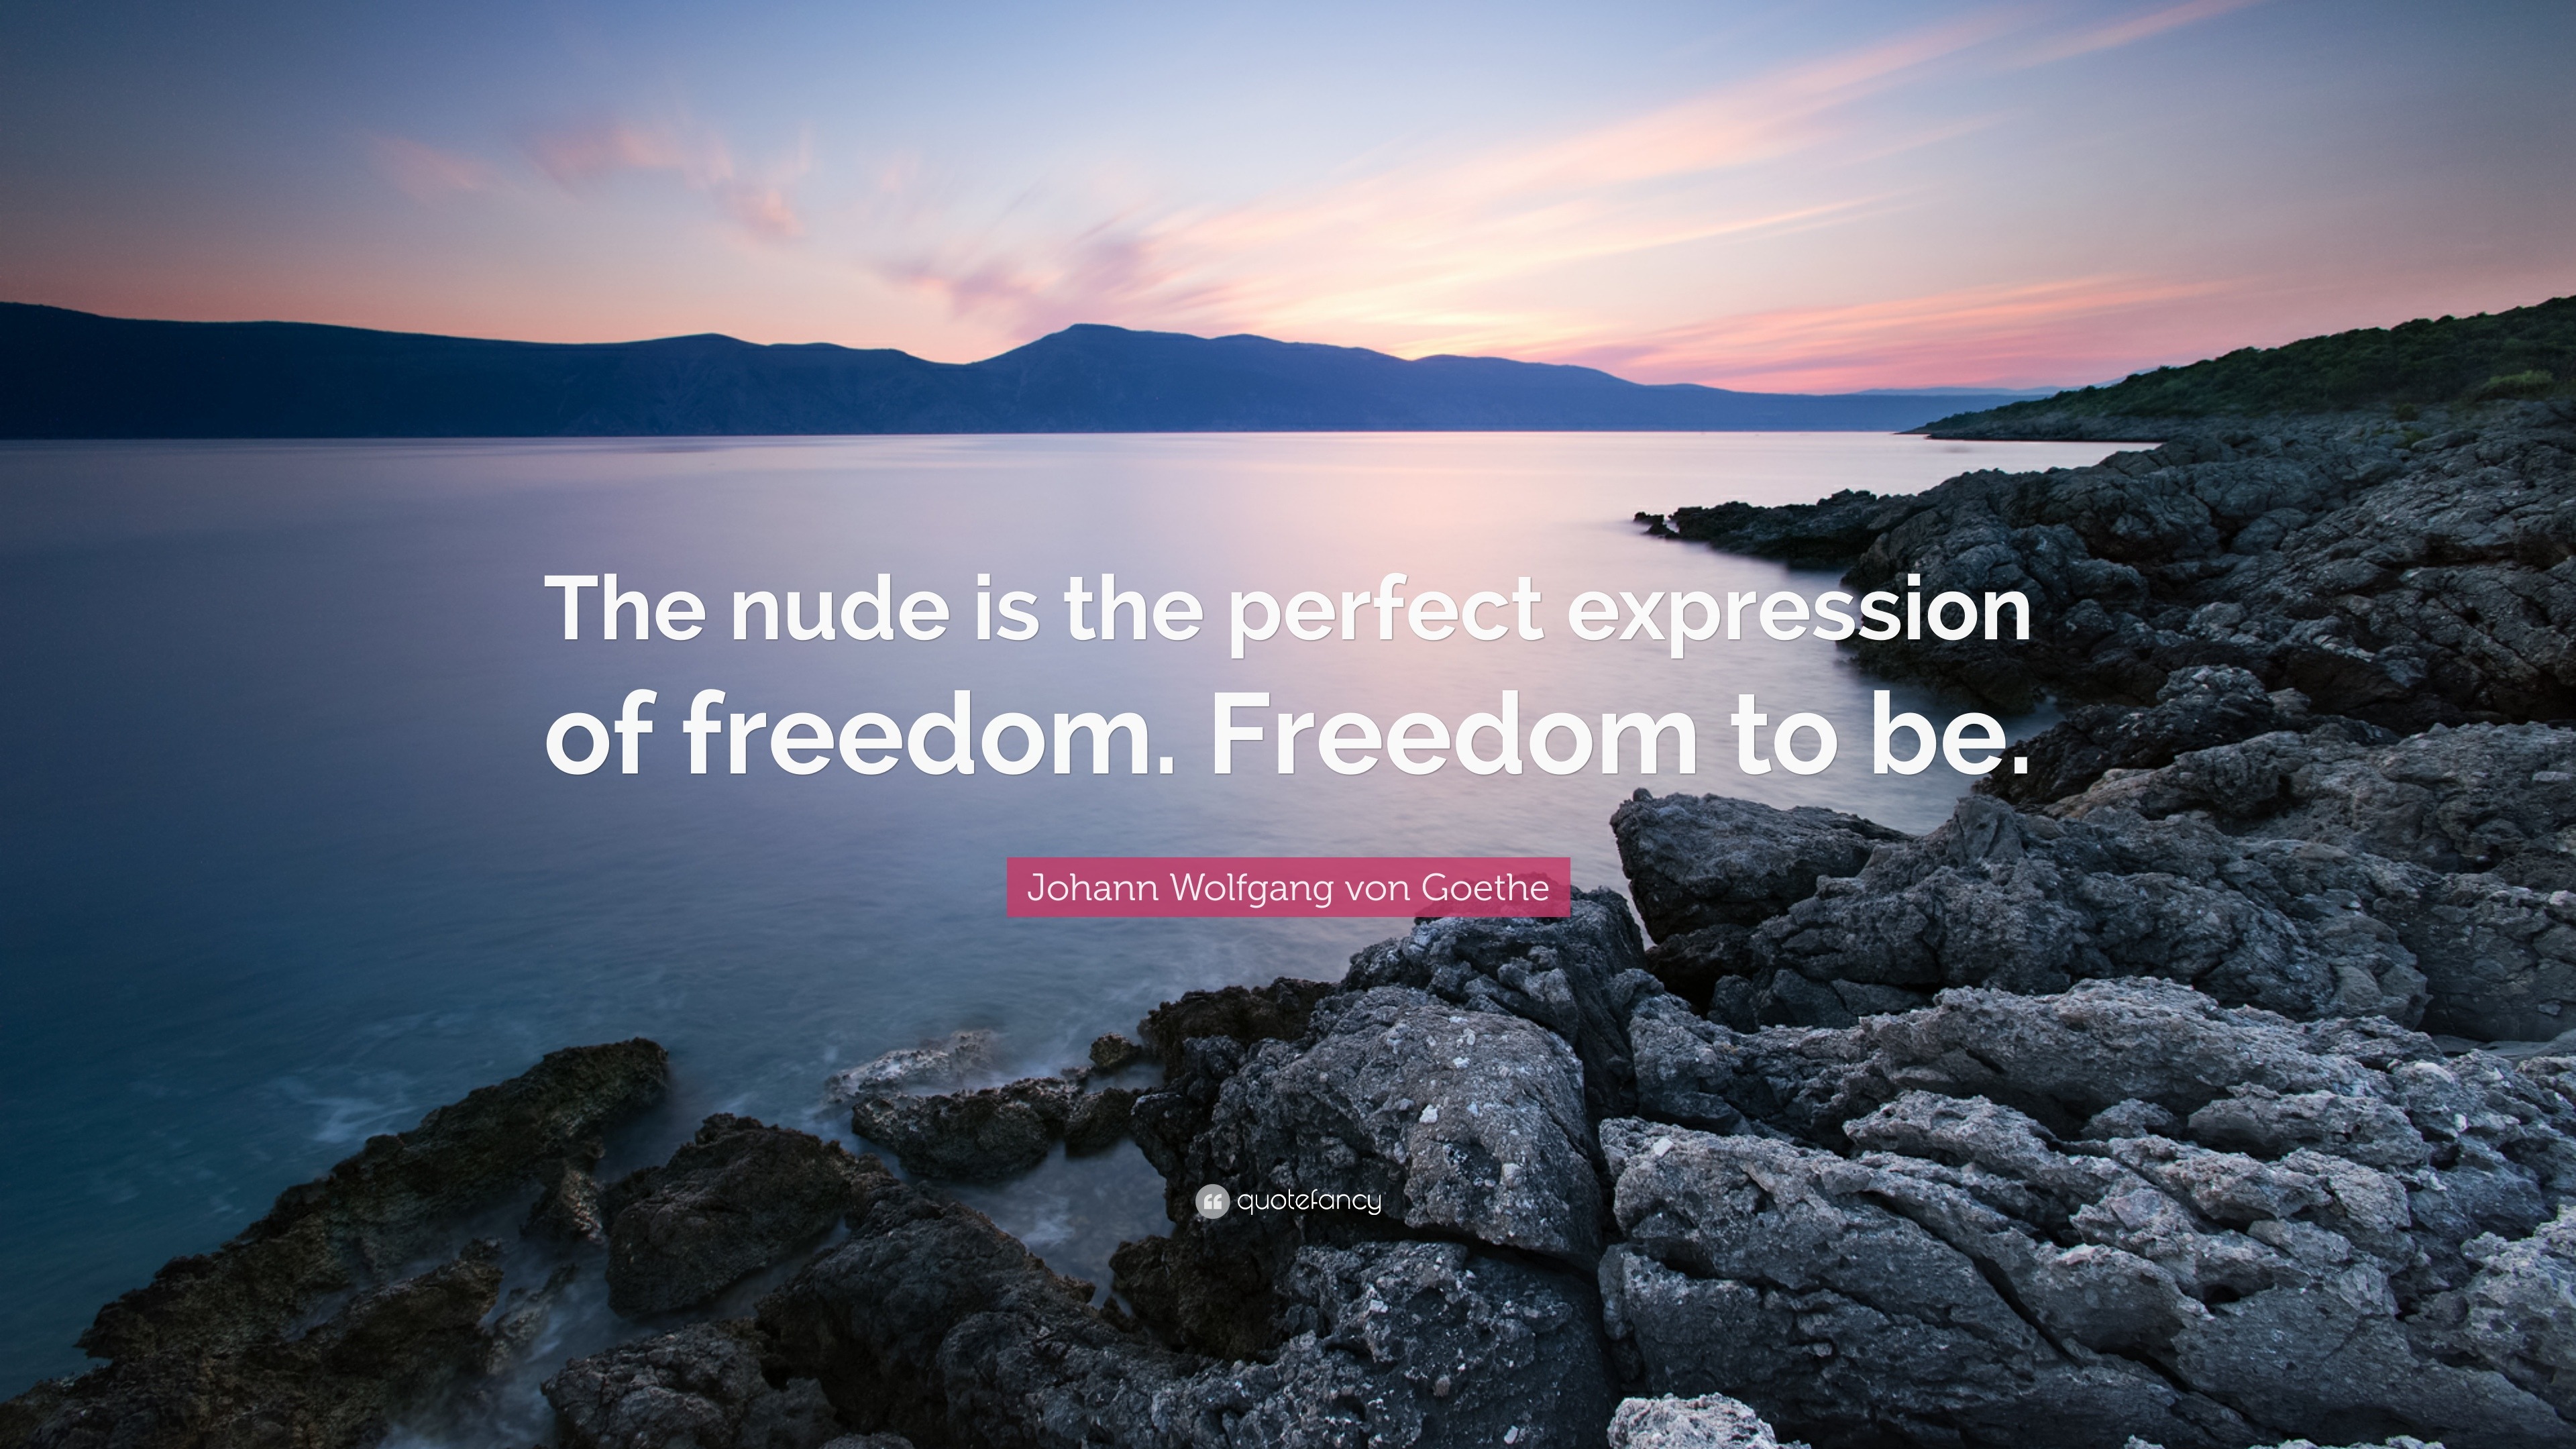 Johann Wolfgang von Goethe Quote: “The nude is the perfect expression of  freedom. Freedom to be.”